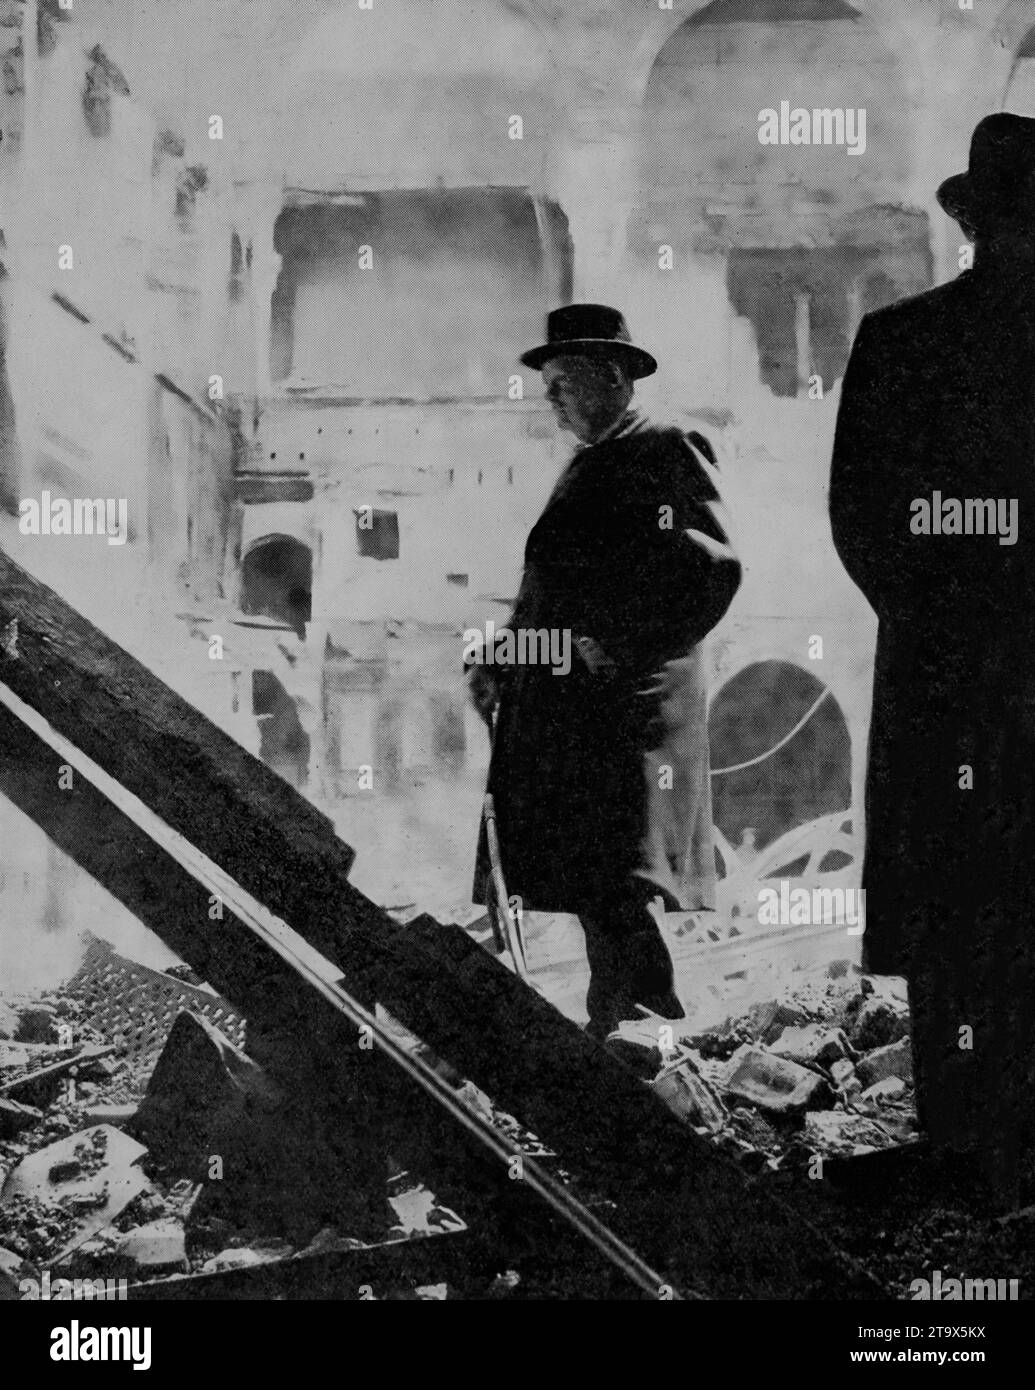 The night of 10th May 1941 was moonlit and clear presenting an opportunity for the Luftwaffe to bomb London during the Second World War. Westminster Abbey, British Museum, offices and homes were hit or burnt out during the air raids. Prime Minister Winston Churchill inspects the ruins of part of the Houses of Parliament also damaged. Stock Photo